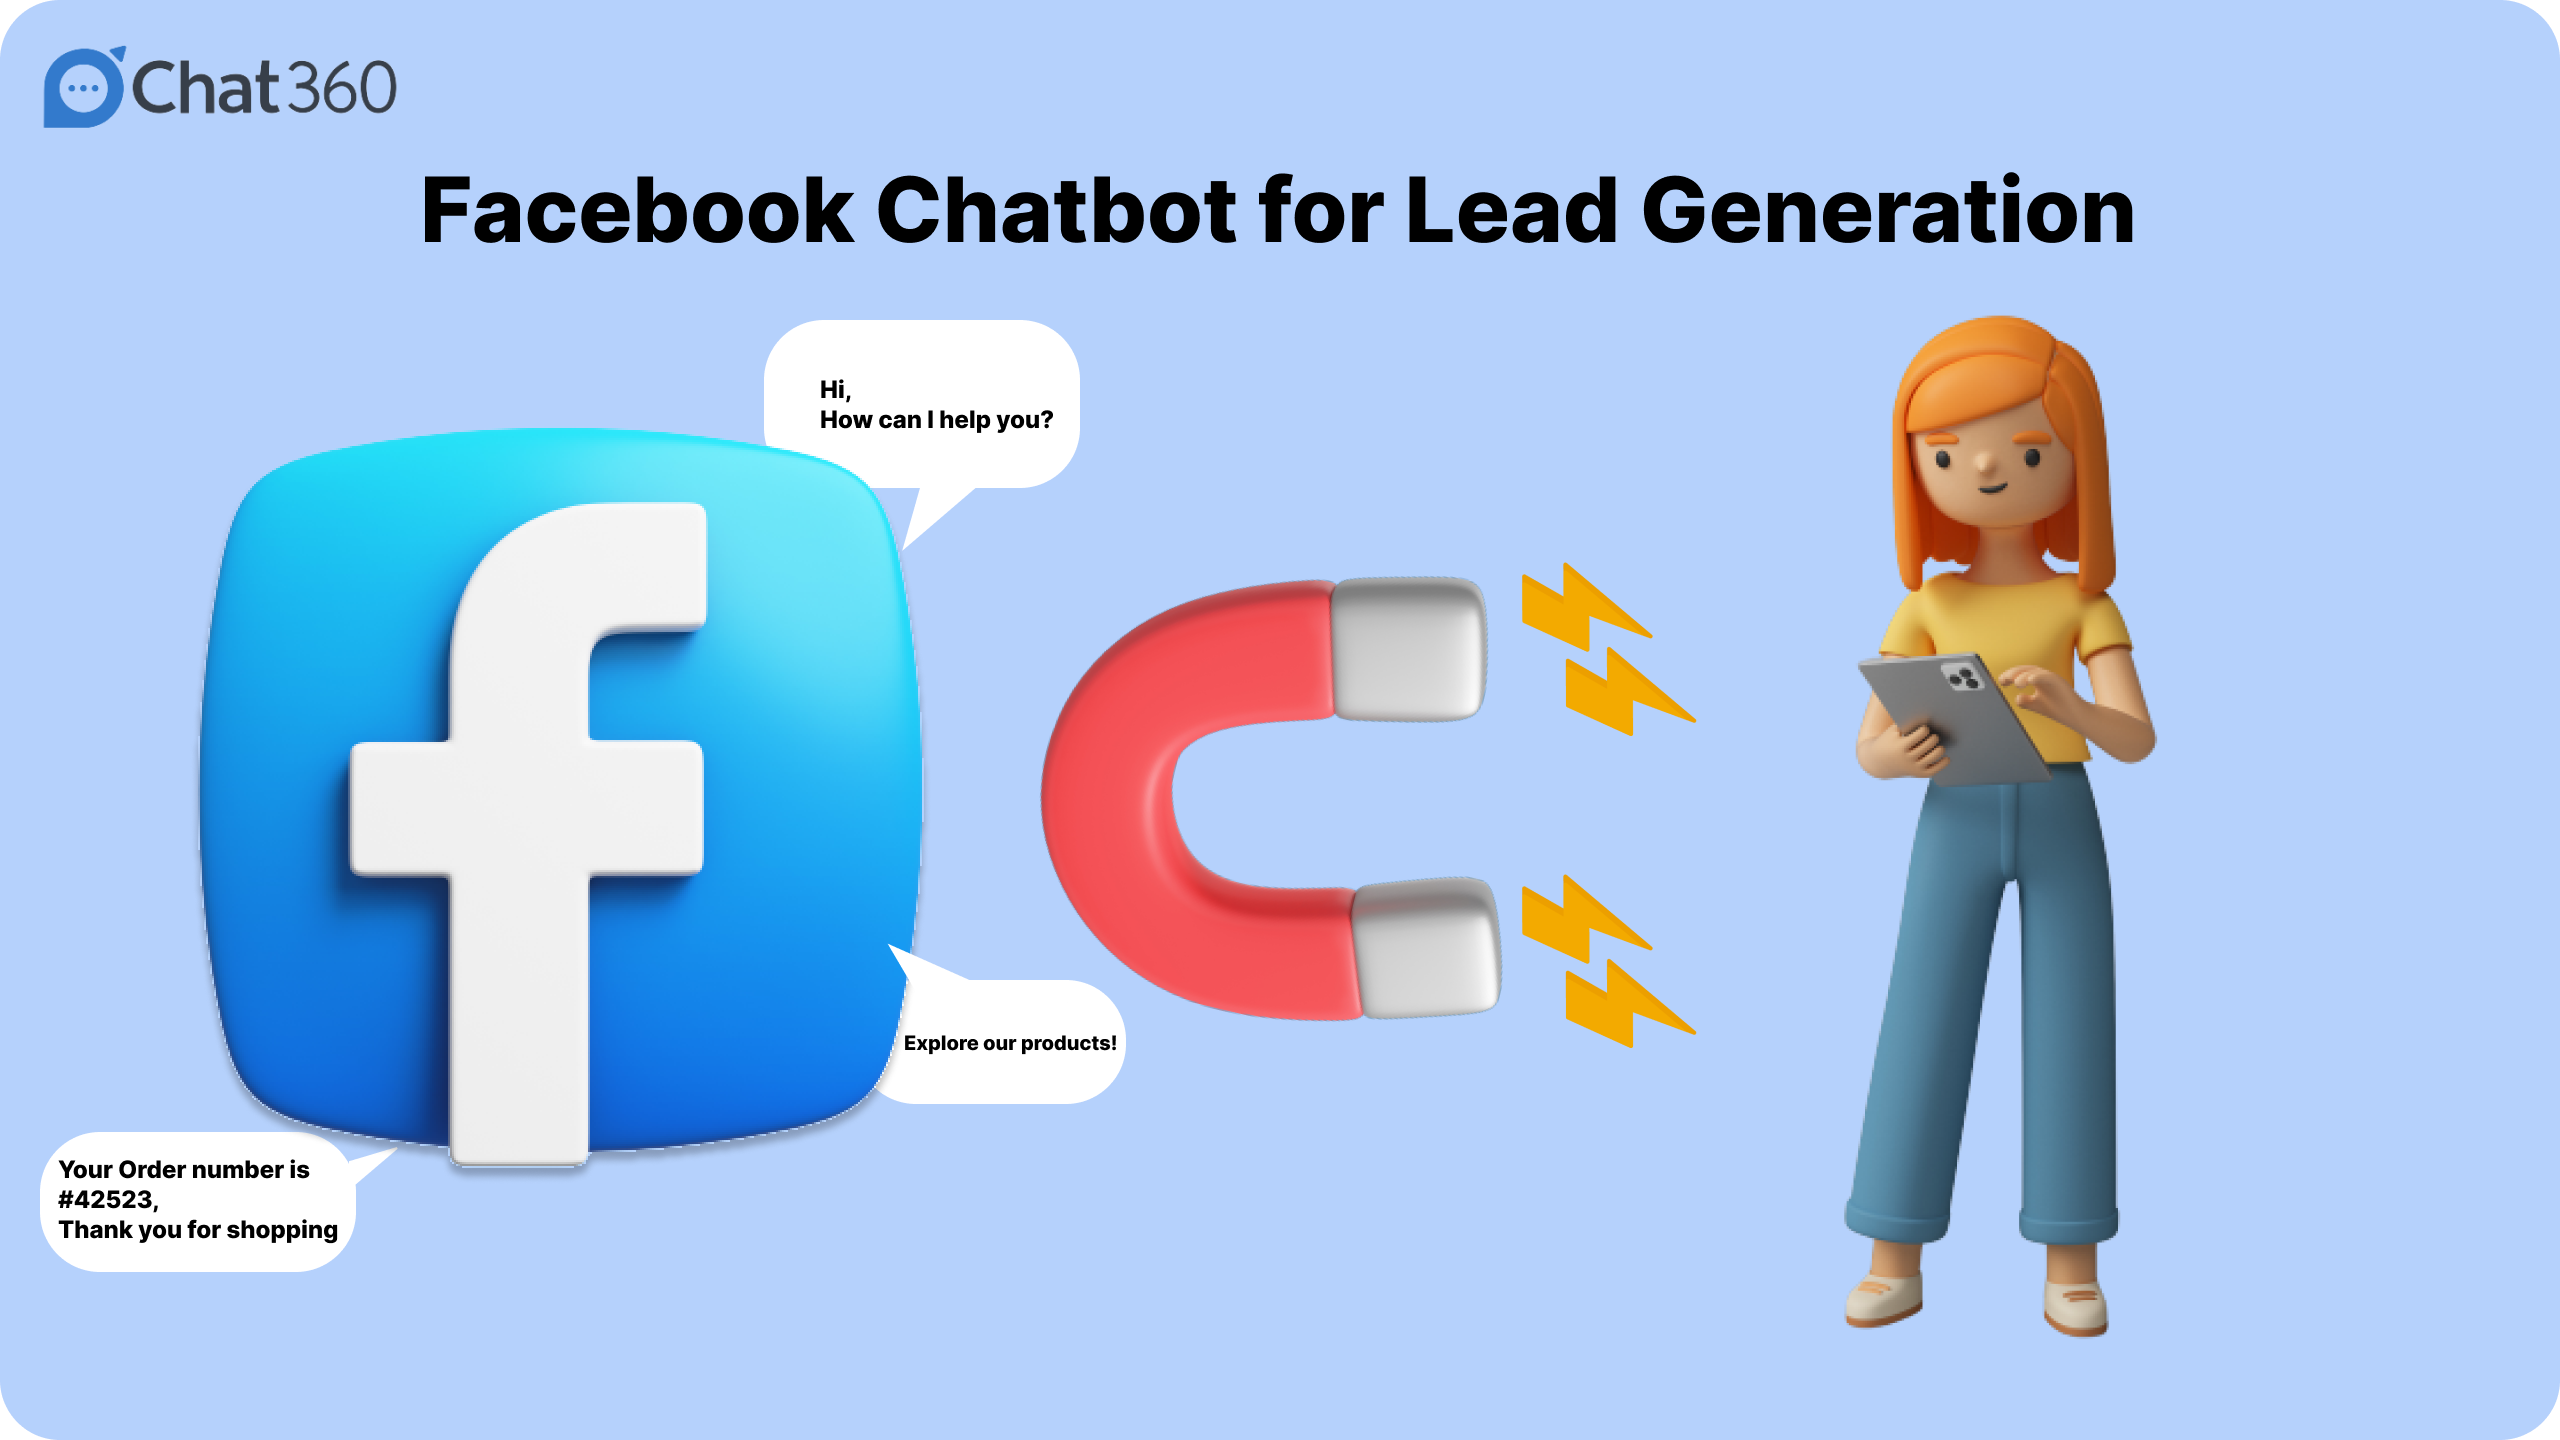 Lead Generation on Facebook using Chatbots